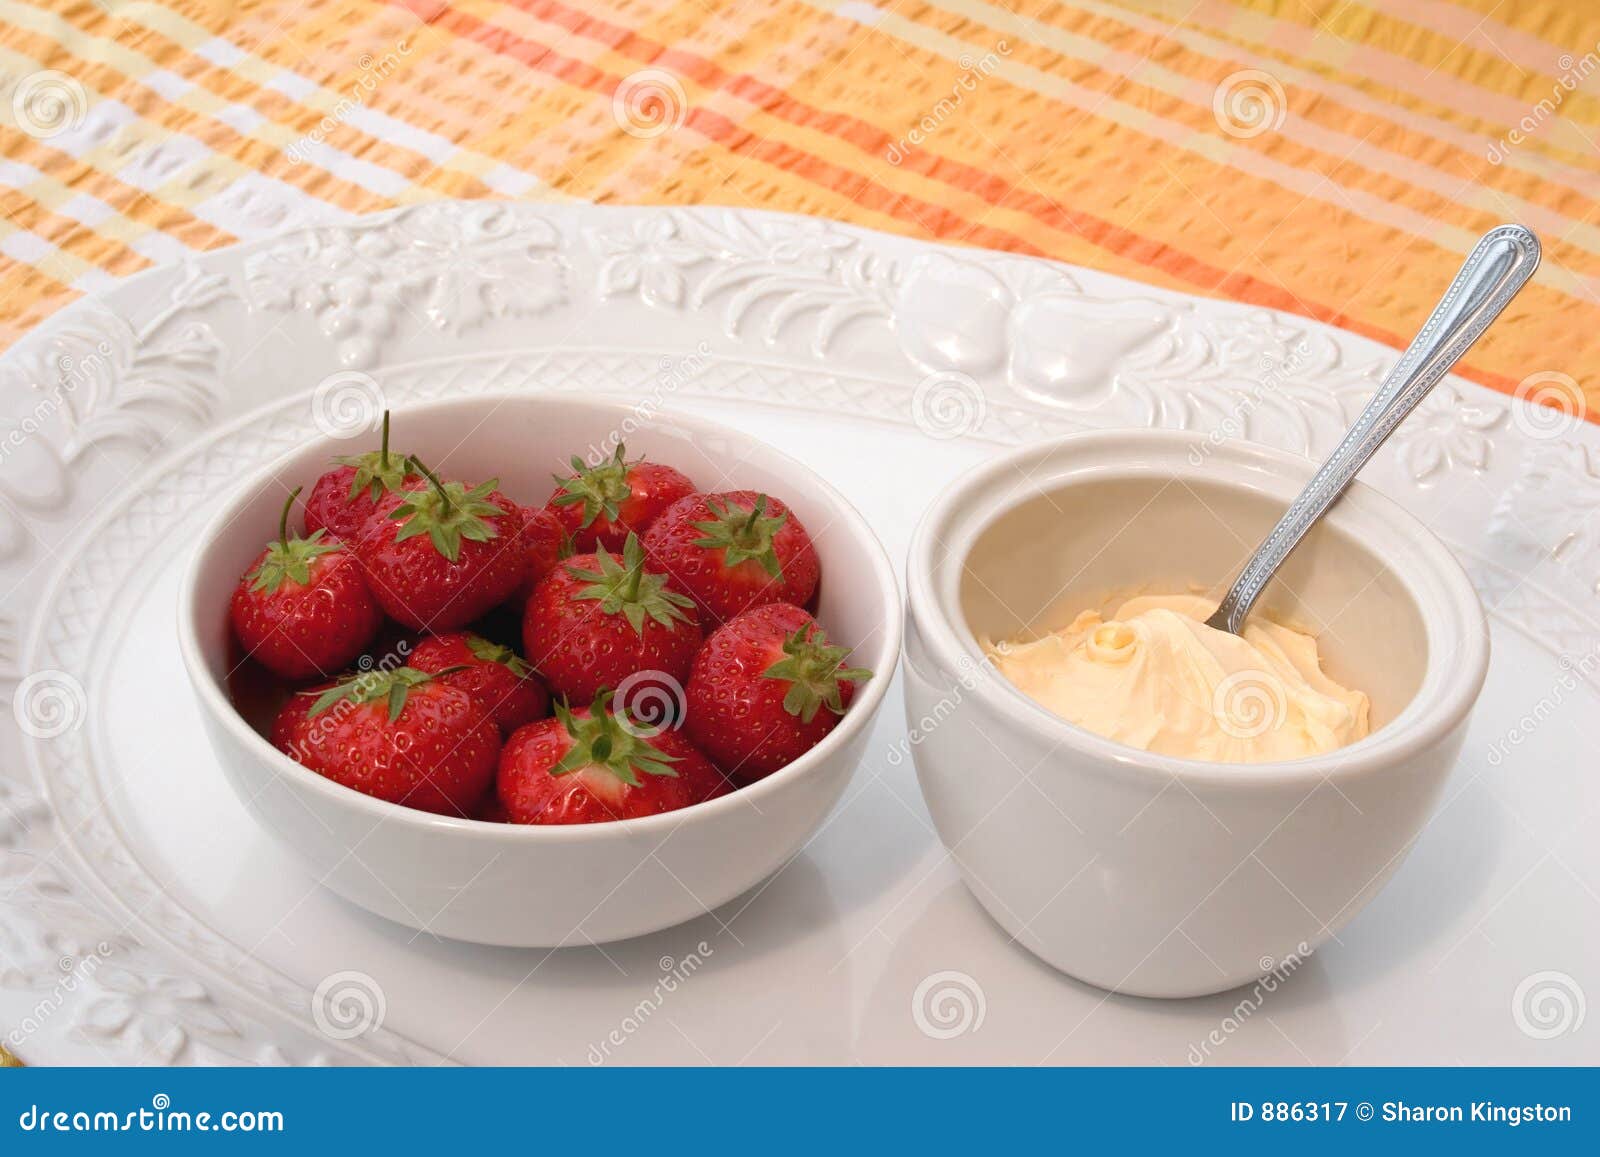 strawberries and clotted cream,